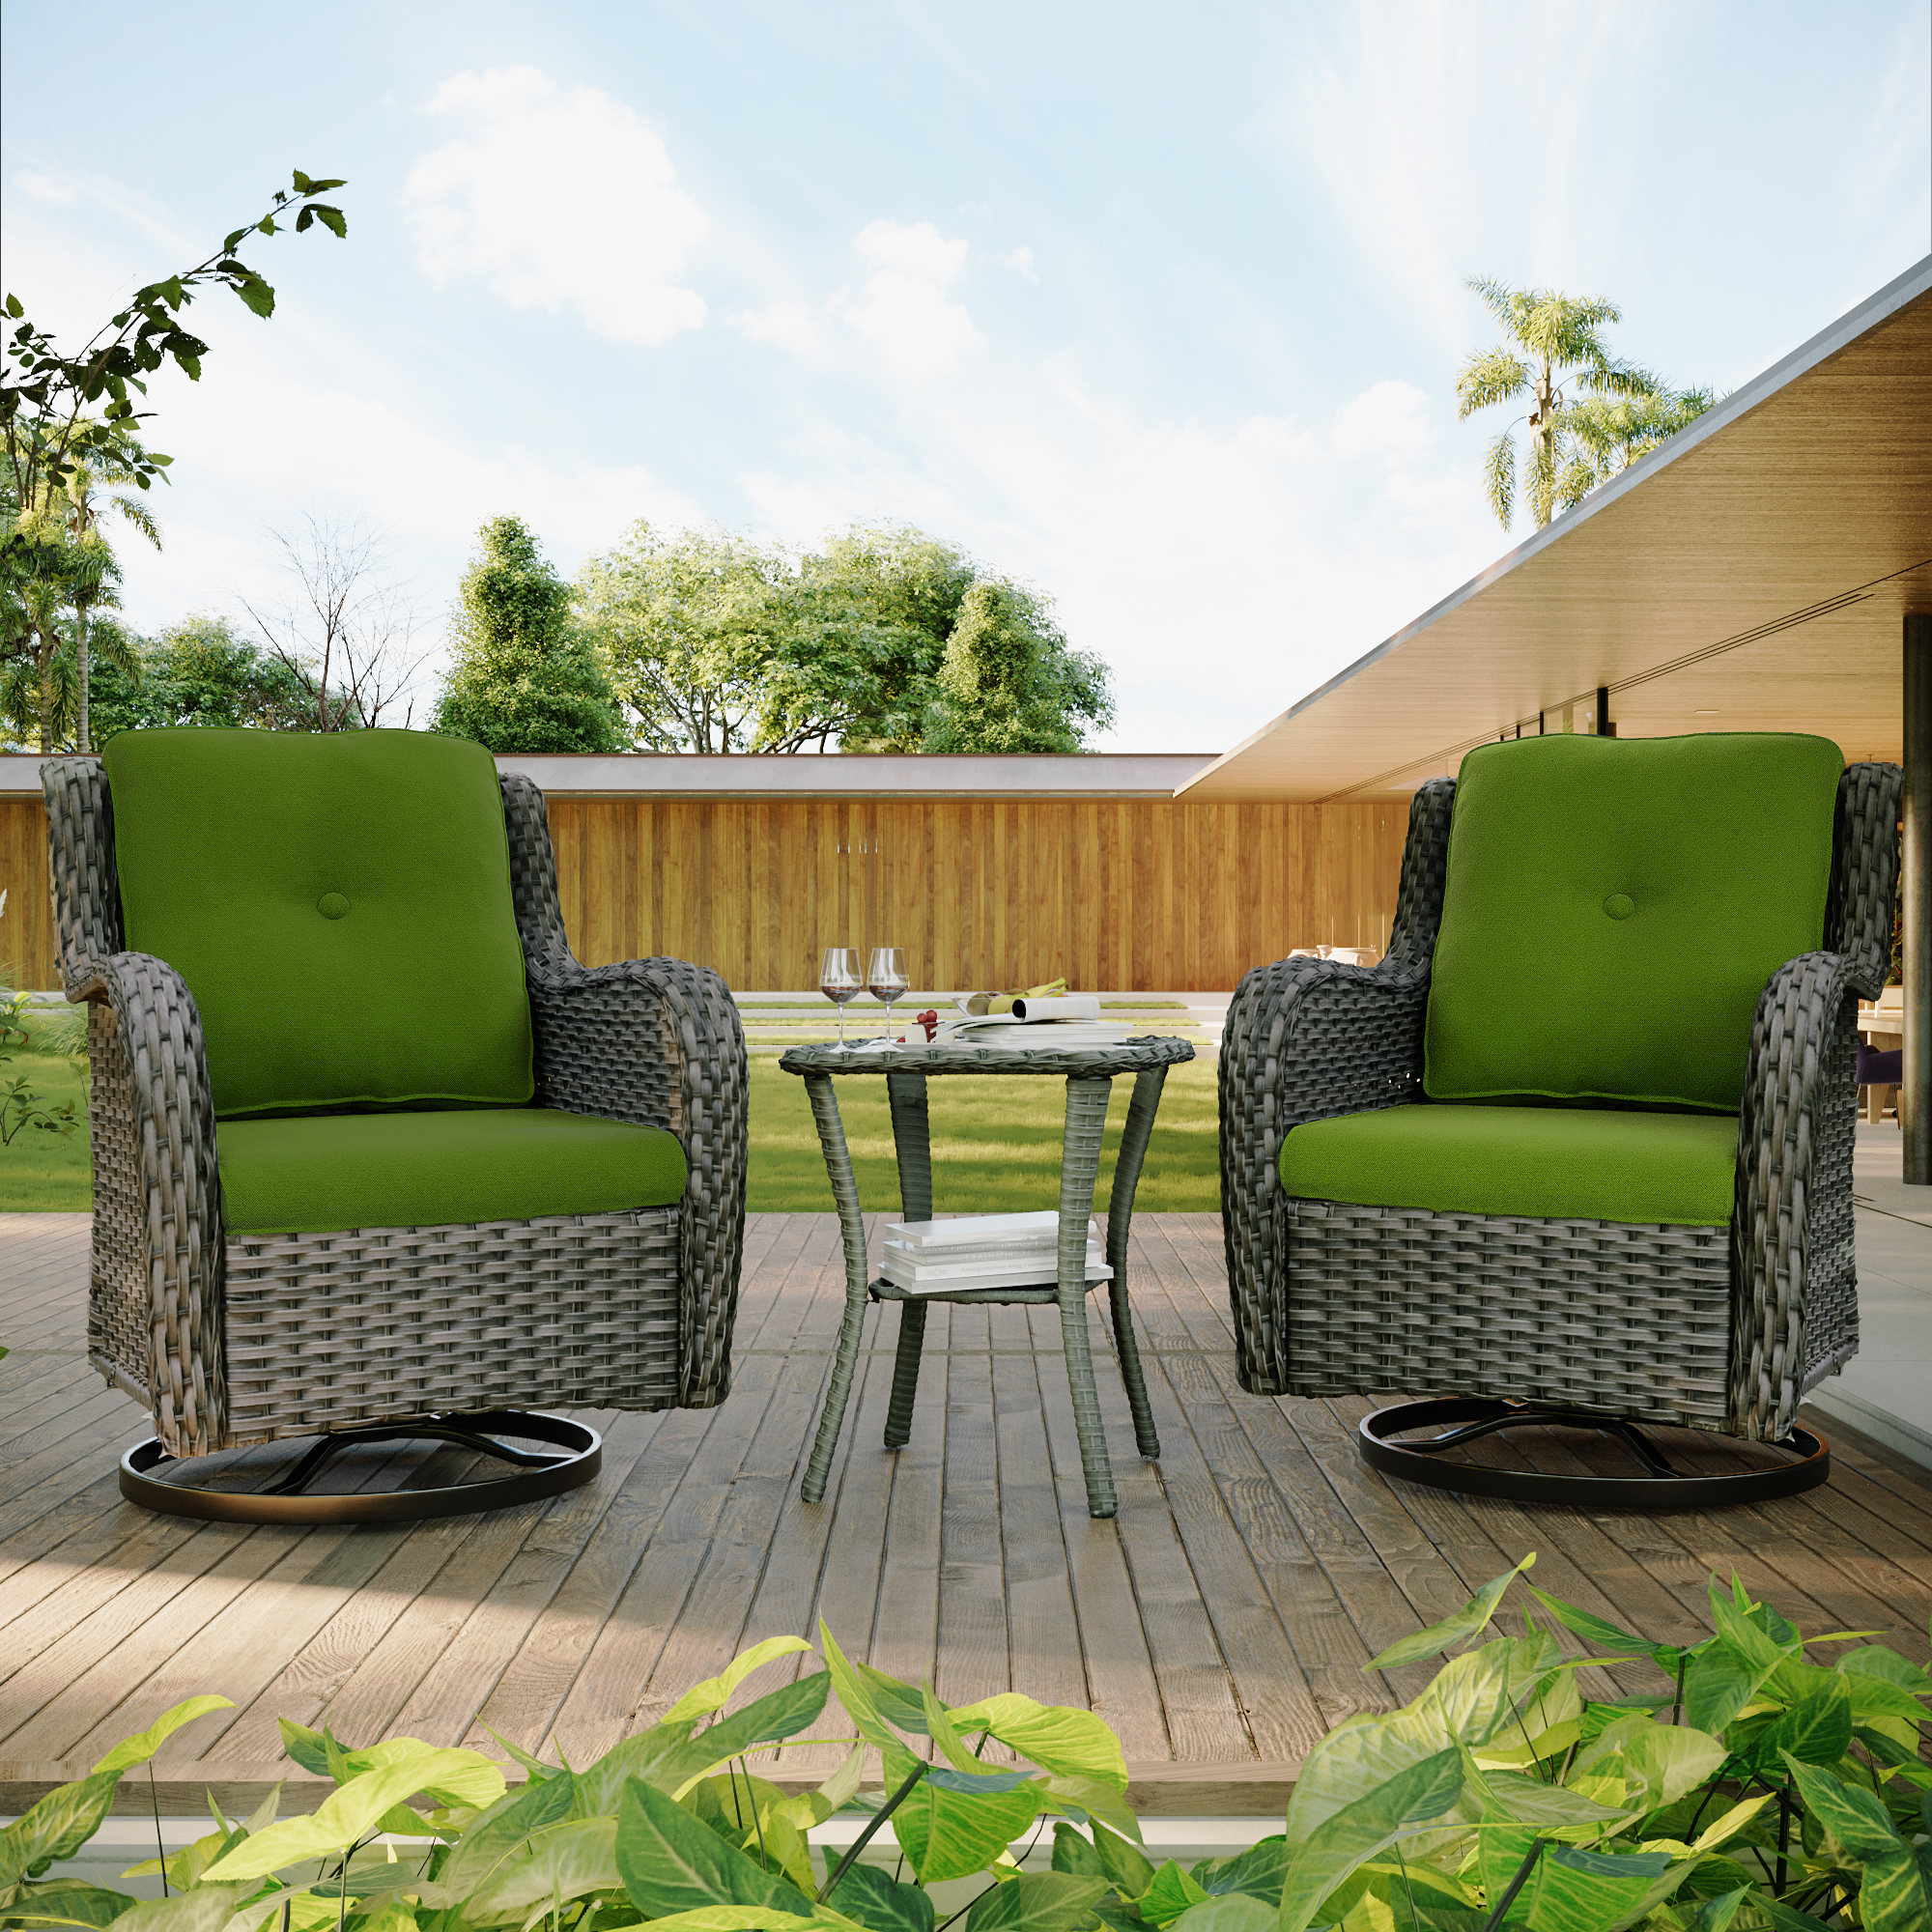 Meetleisure Outdoor Swivel Rocker Wicker Patio Chairs Sets of 2 With Table, Green - image 1 of 6